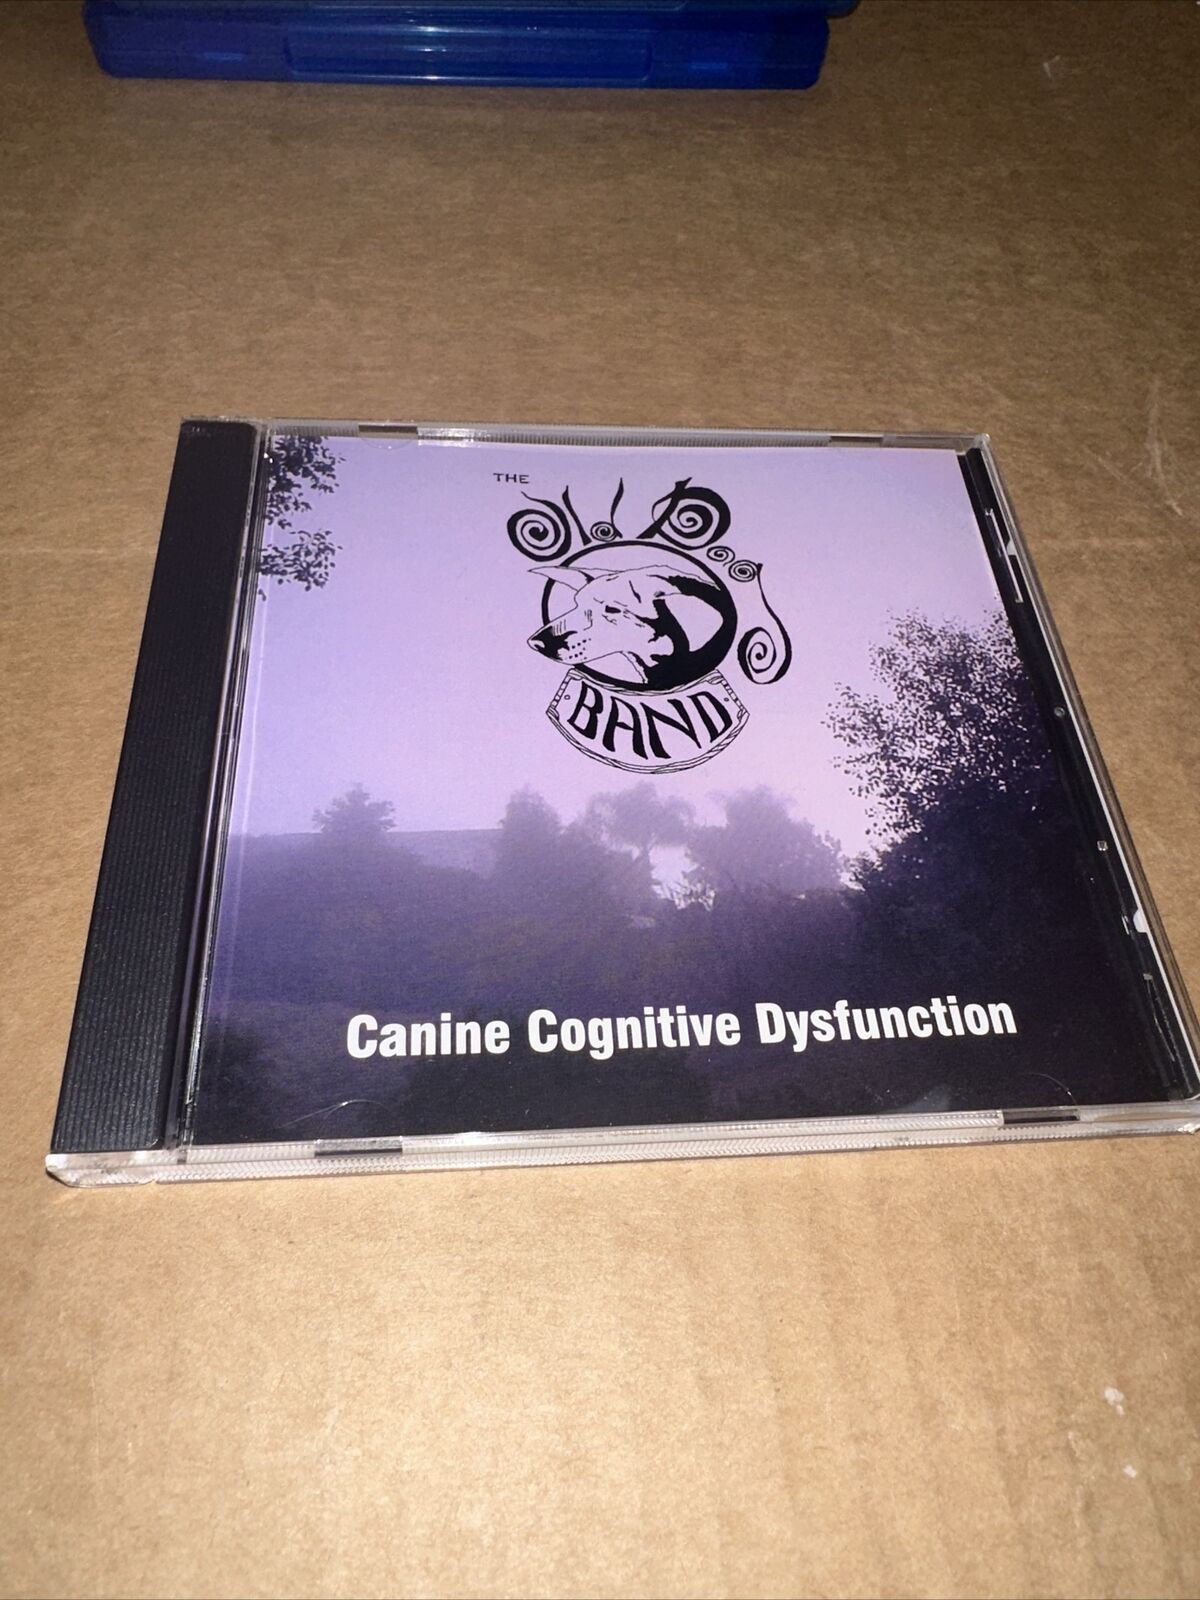 Canine Cognitive Dysfunction by The Old Dog Band (CD, May-2002, The Old Dog...